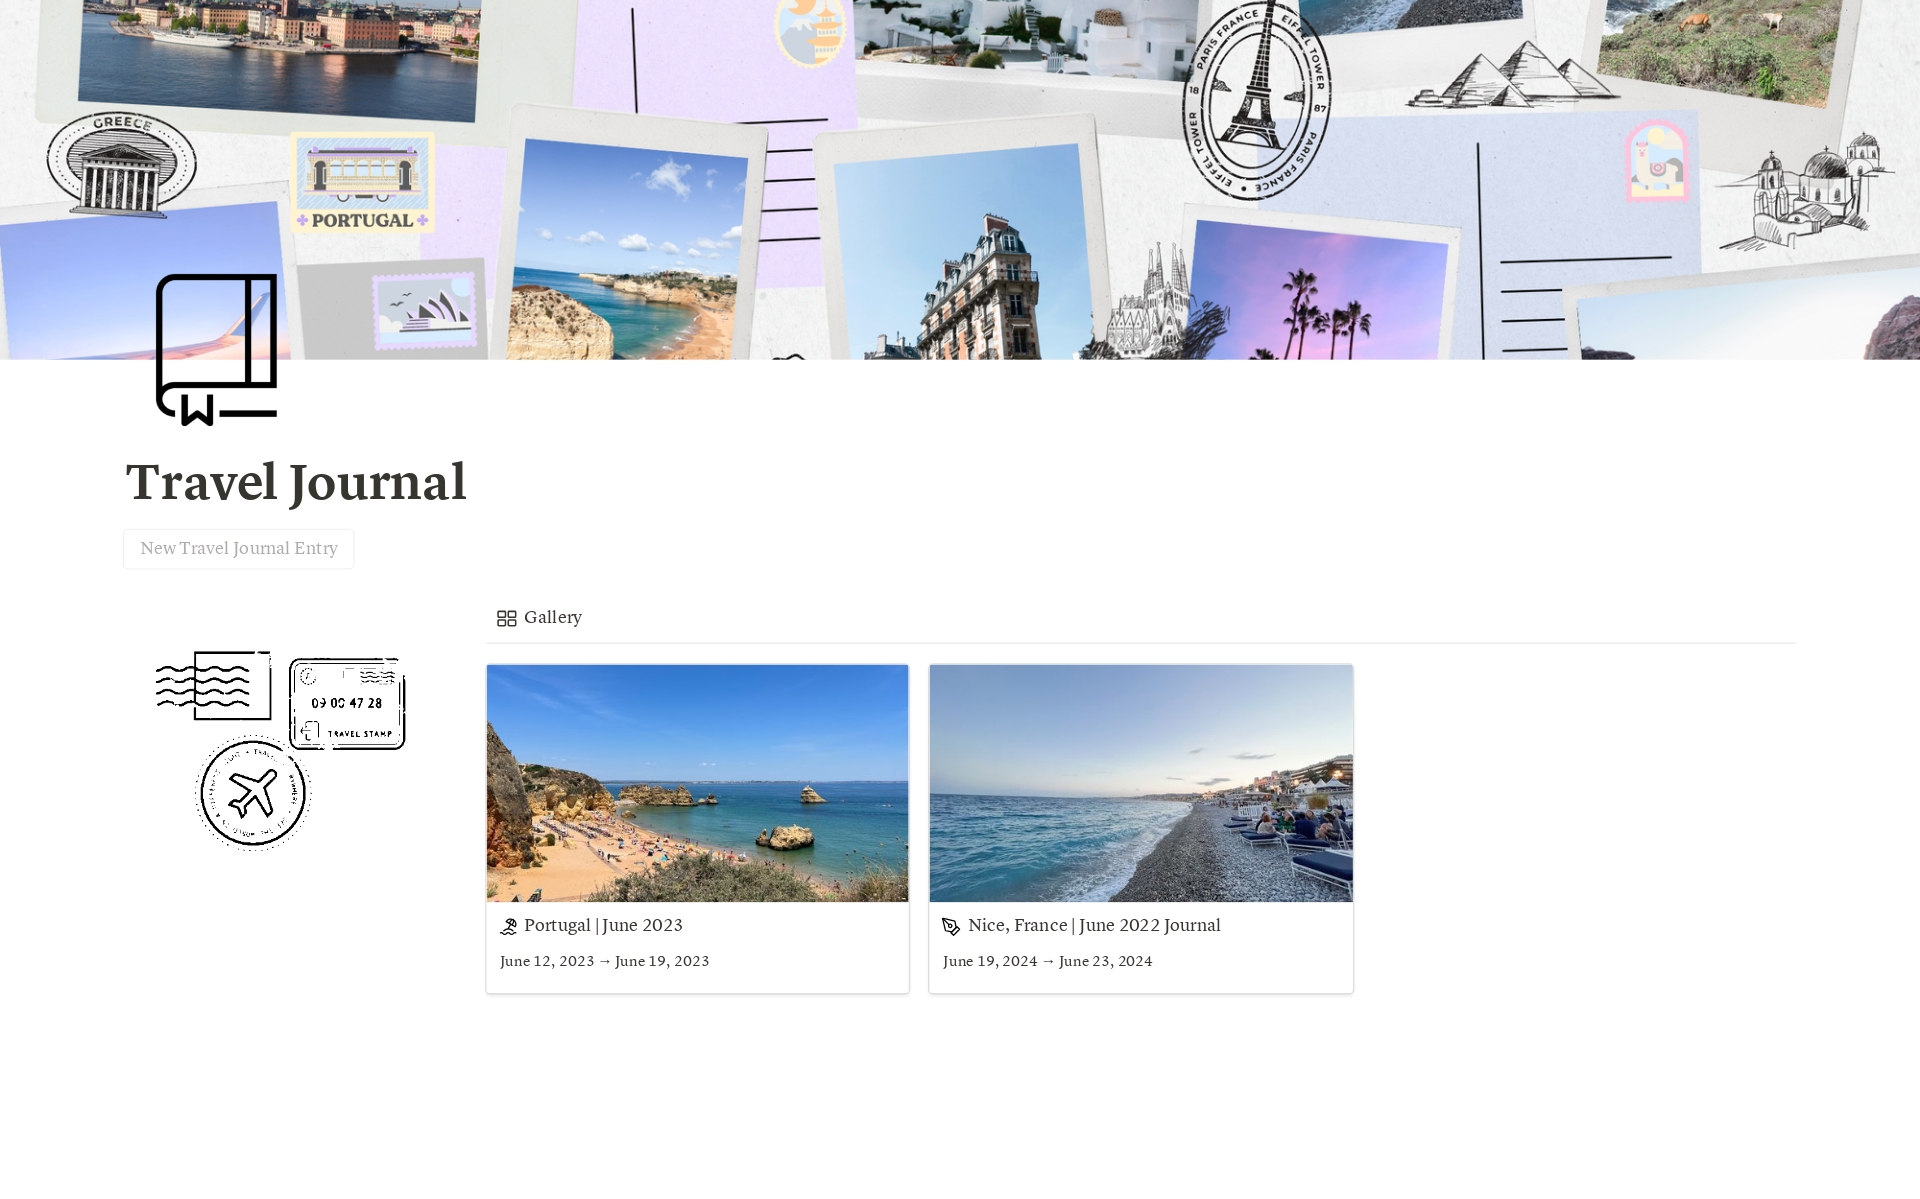 Document all of your favorite memories in one place
- Automated journal prompts
- Embed images, videos, and social posts